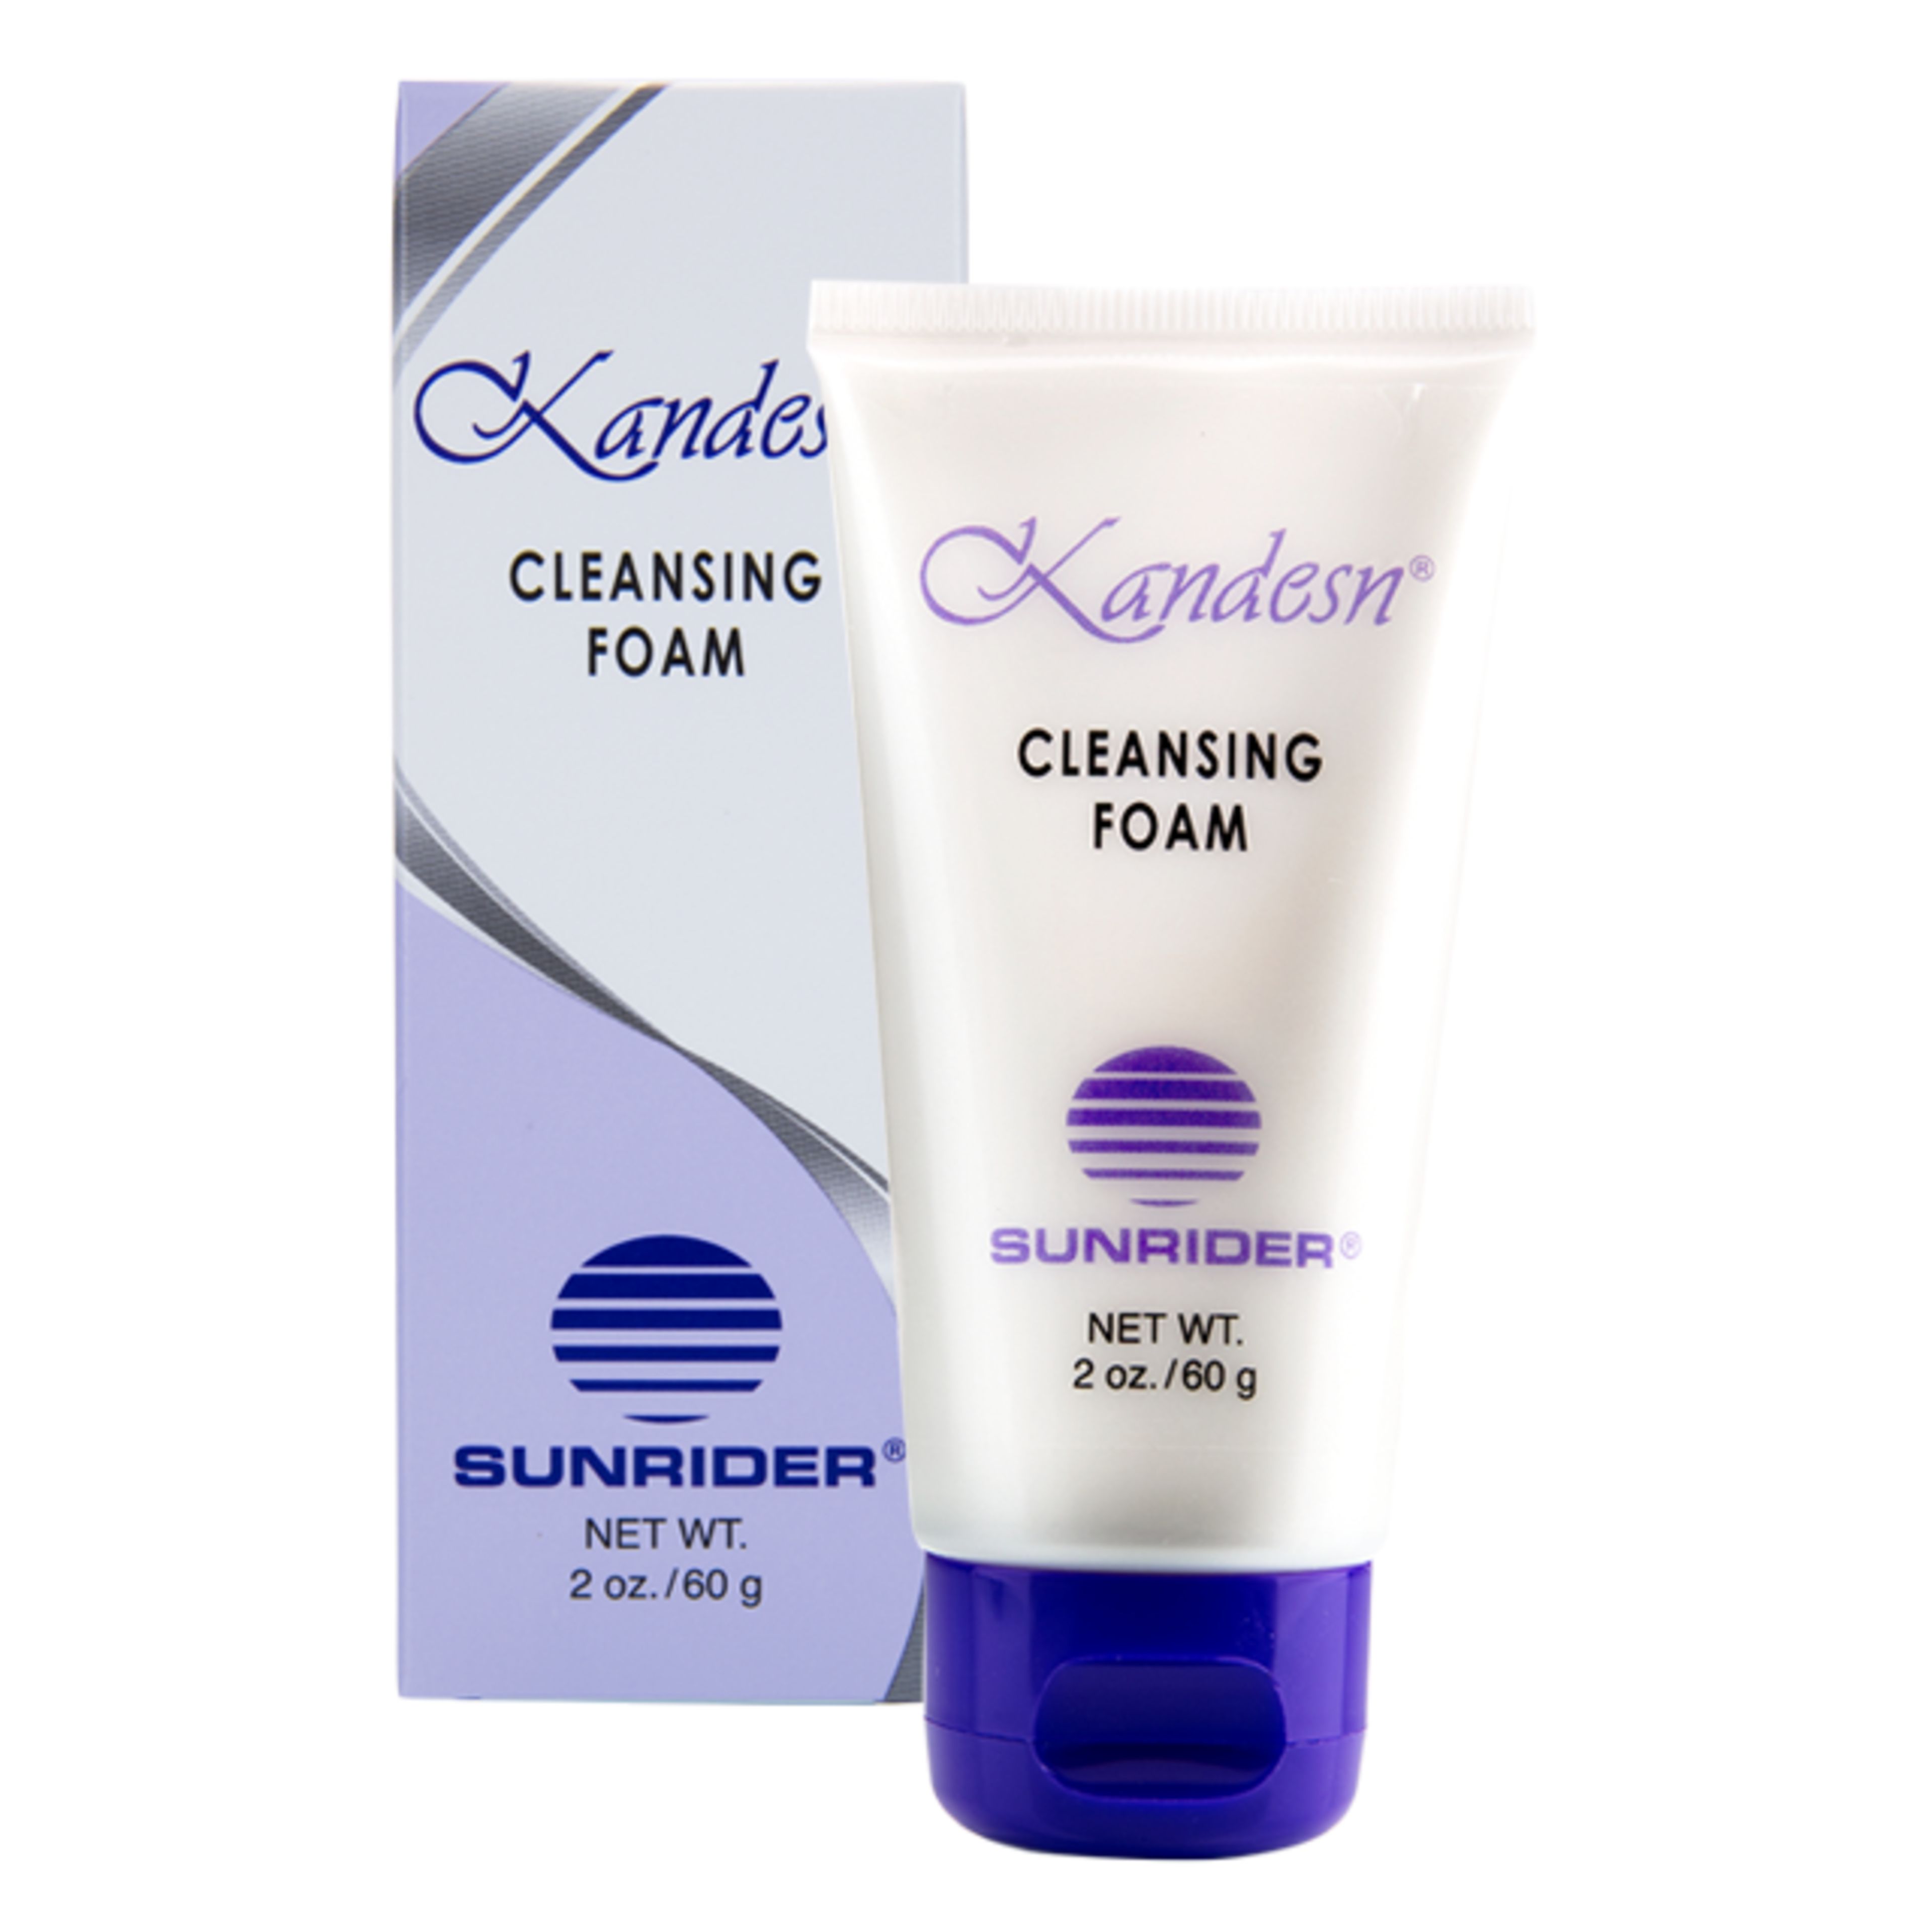 Kandesn® Cleansing Foam 2 oz.  